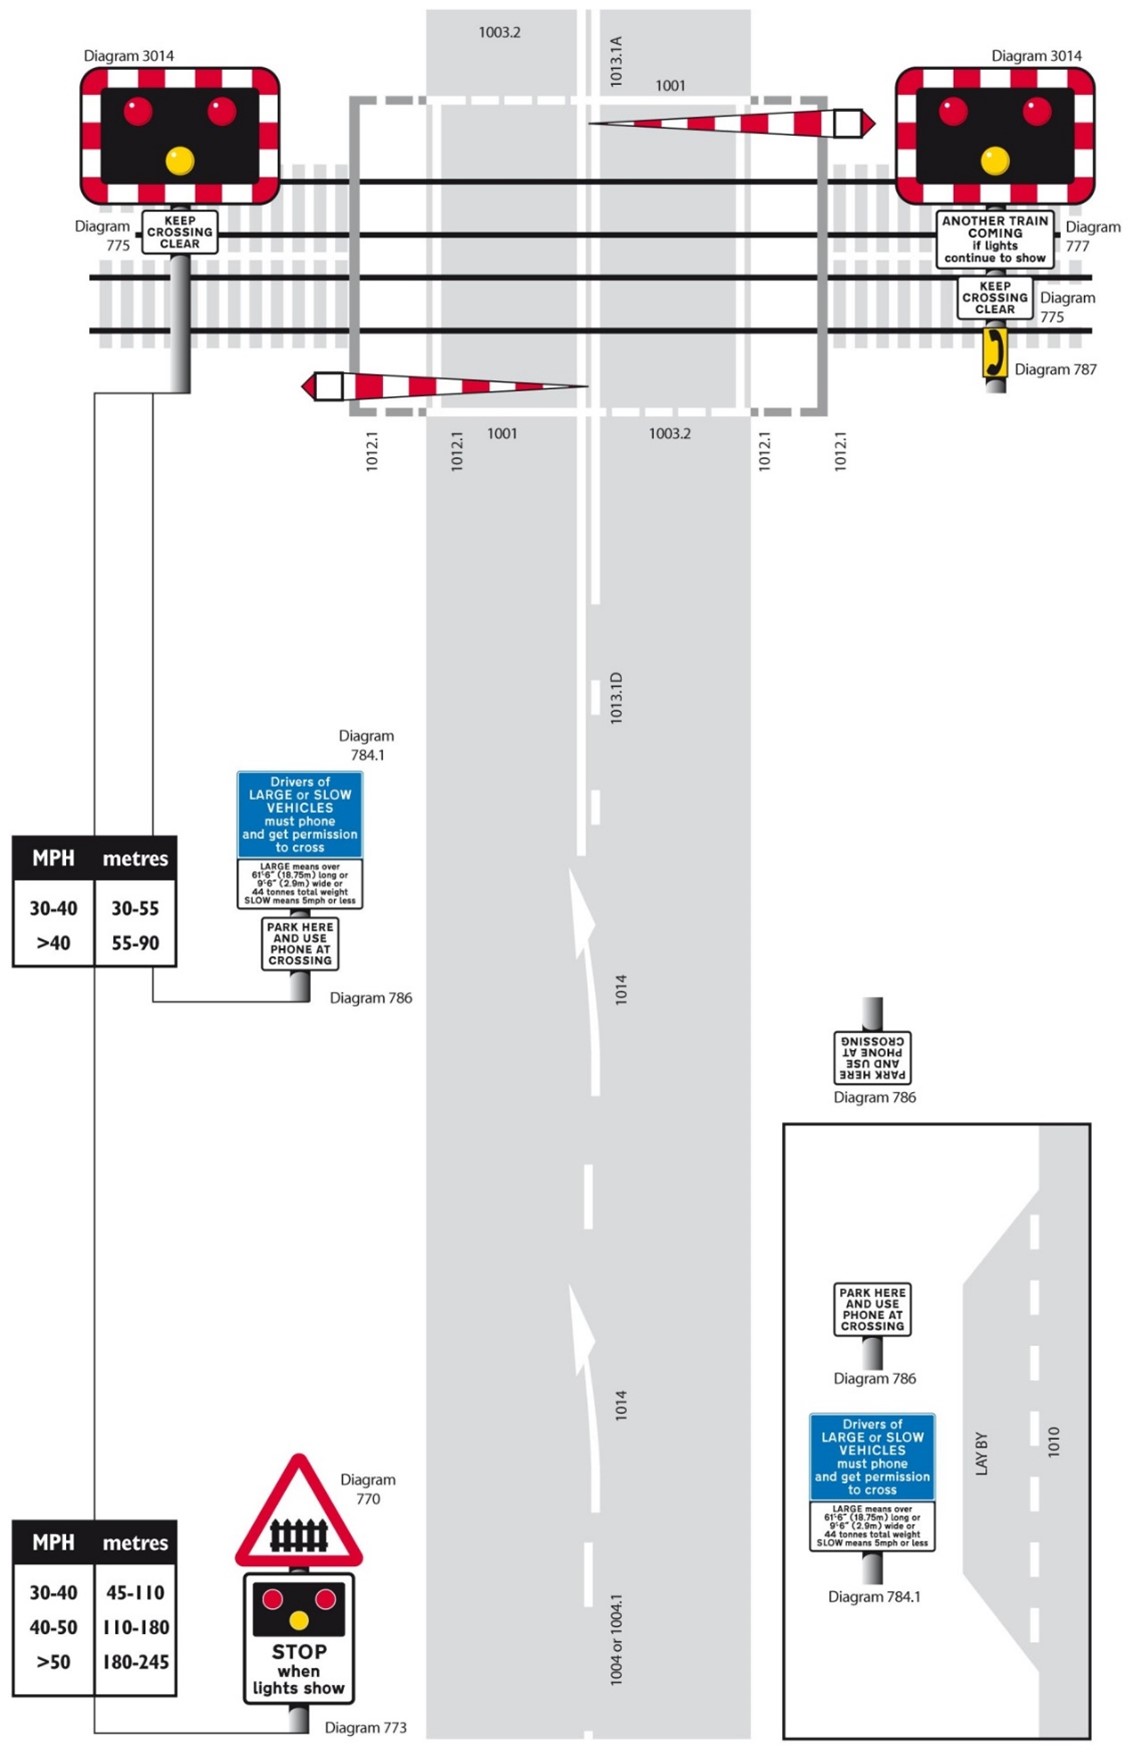 Figure 3: Typical layout of automatic half barrier crossing or automatic barrier crossing (locally monitored)